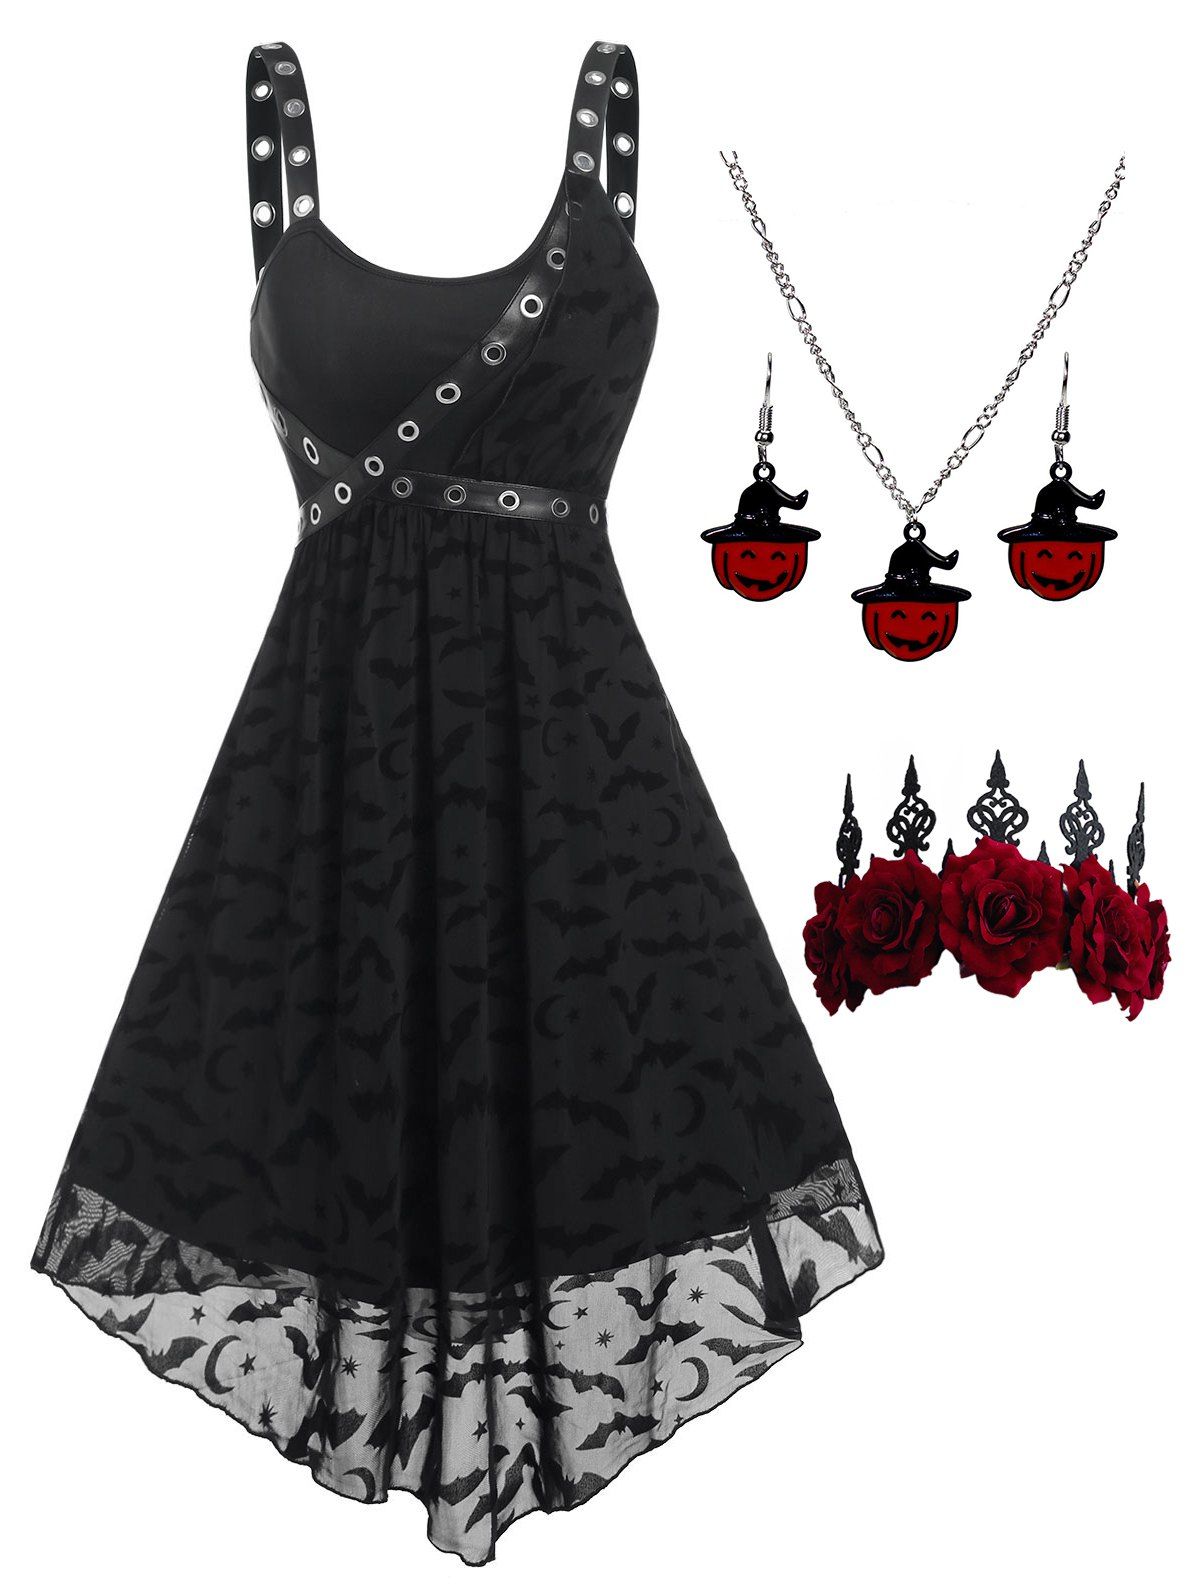 Bat Crescent Stars Mesh Dress And Rose Tiara Pumpkin With Hat Necklace Earrings Set Gothic Outfit - BLACK S